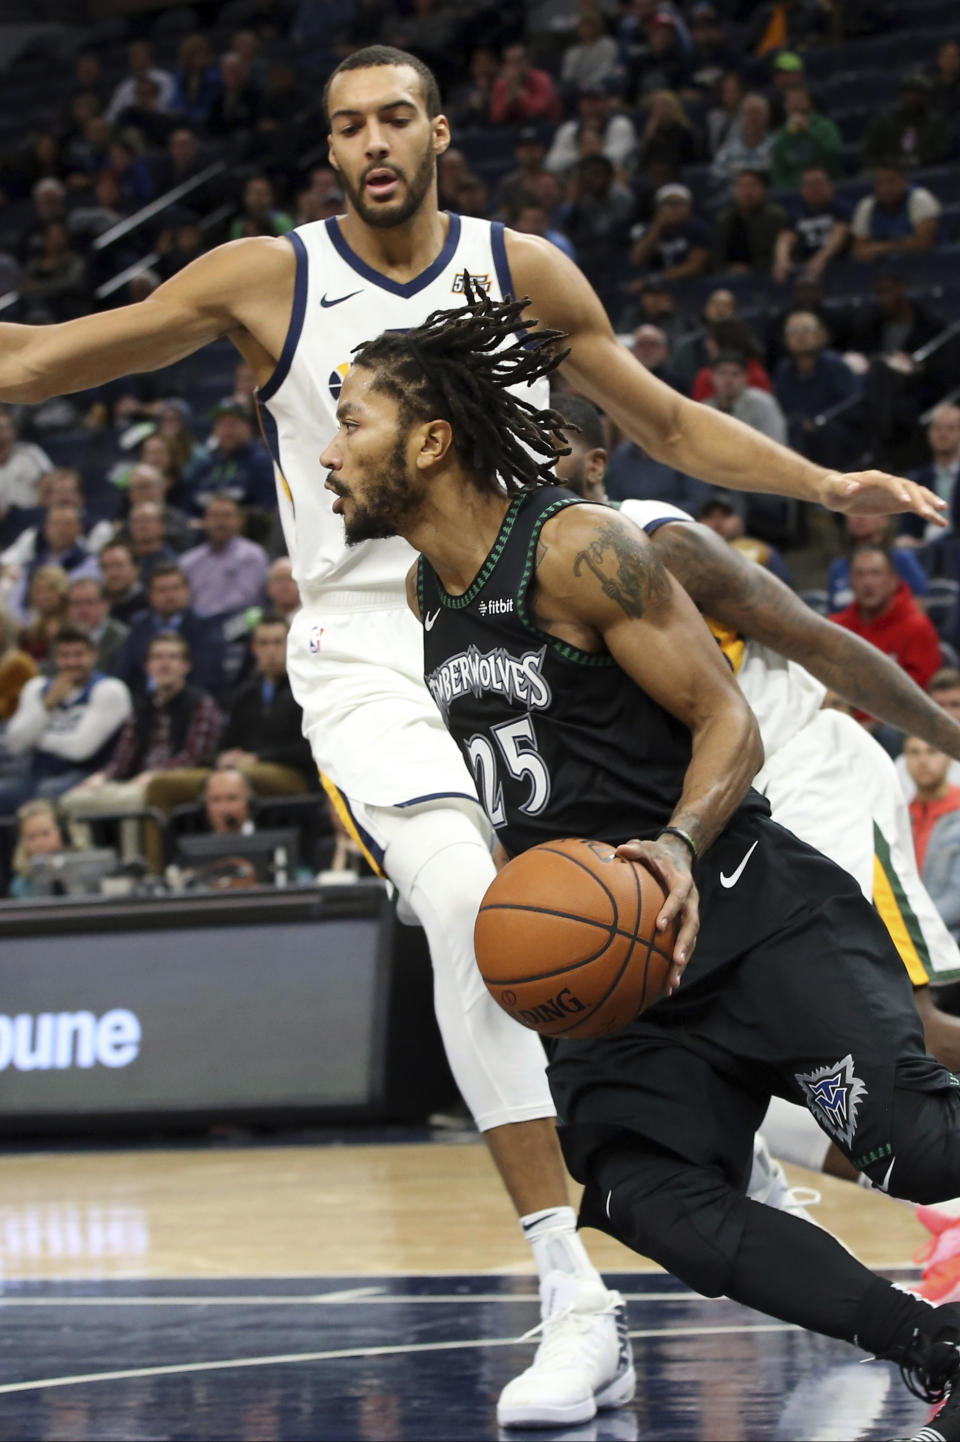 Minnesota Timberwolves' Derrick Rose drives around Utah Jazz's Rudy Gobert during the second half of an NBA basketball game Wednesday, Oct. 31, 2018, in Minneapolis. Rose led the Timberwolves with 50 points, a career high, in the Timberwolves' 128-125 win. (AP Photo/Jim Mone)